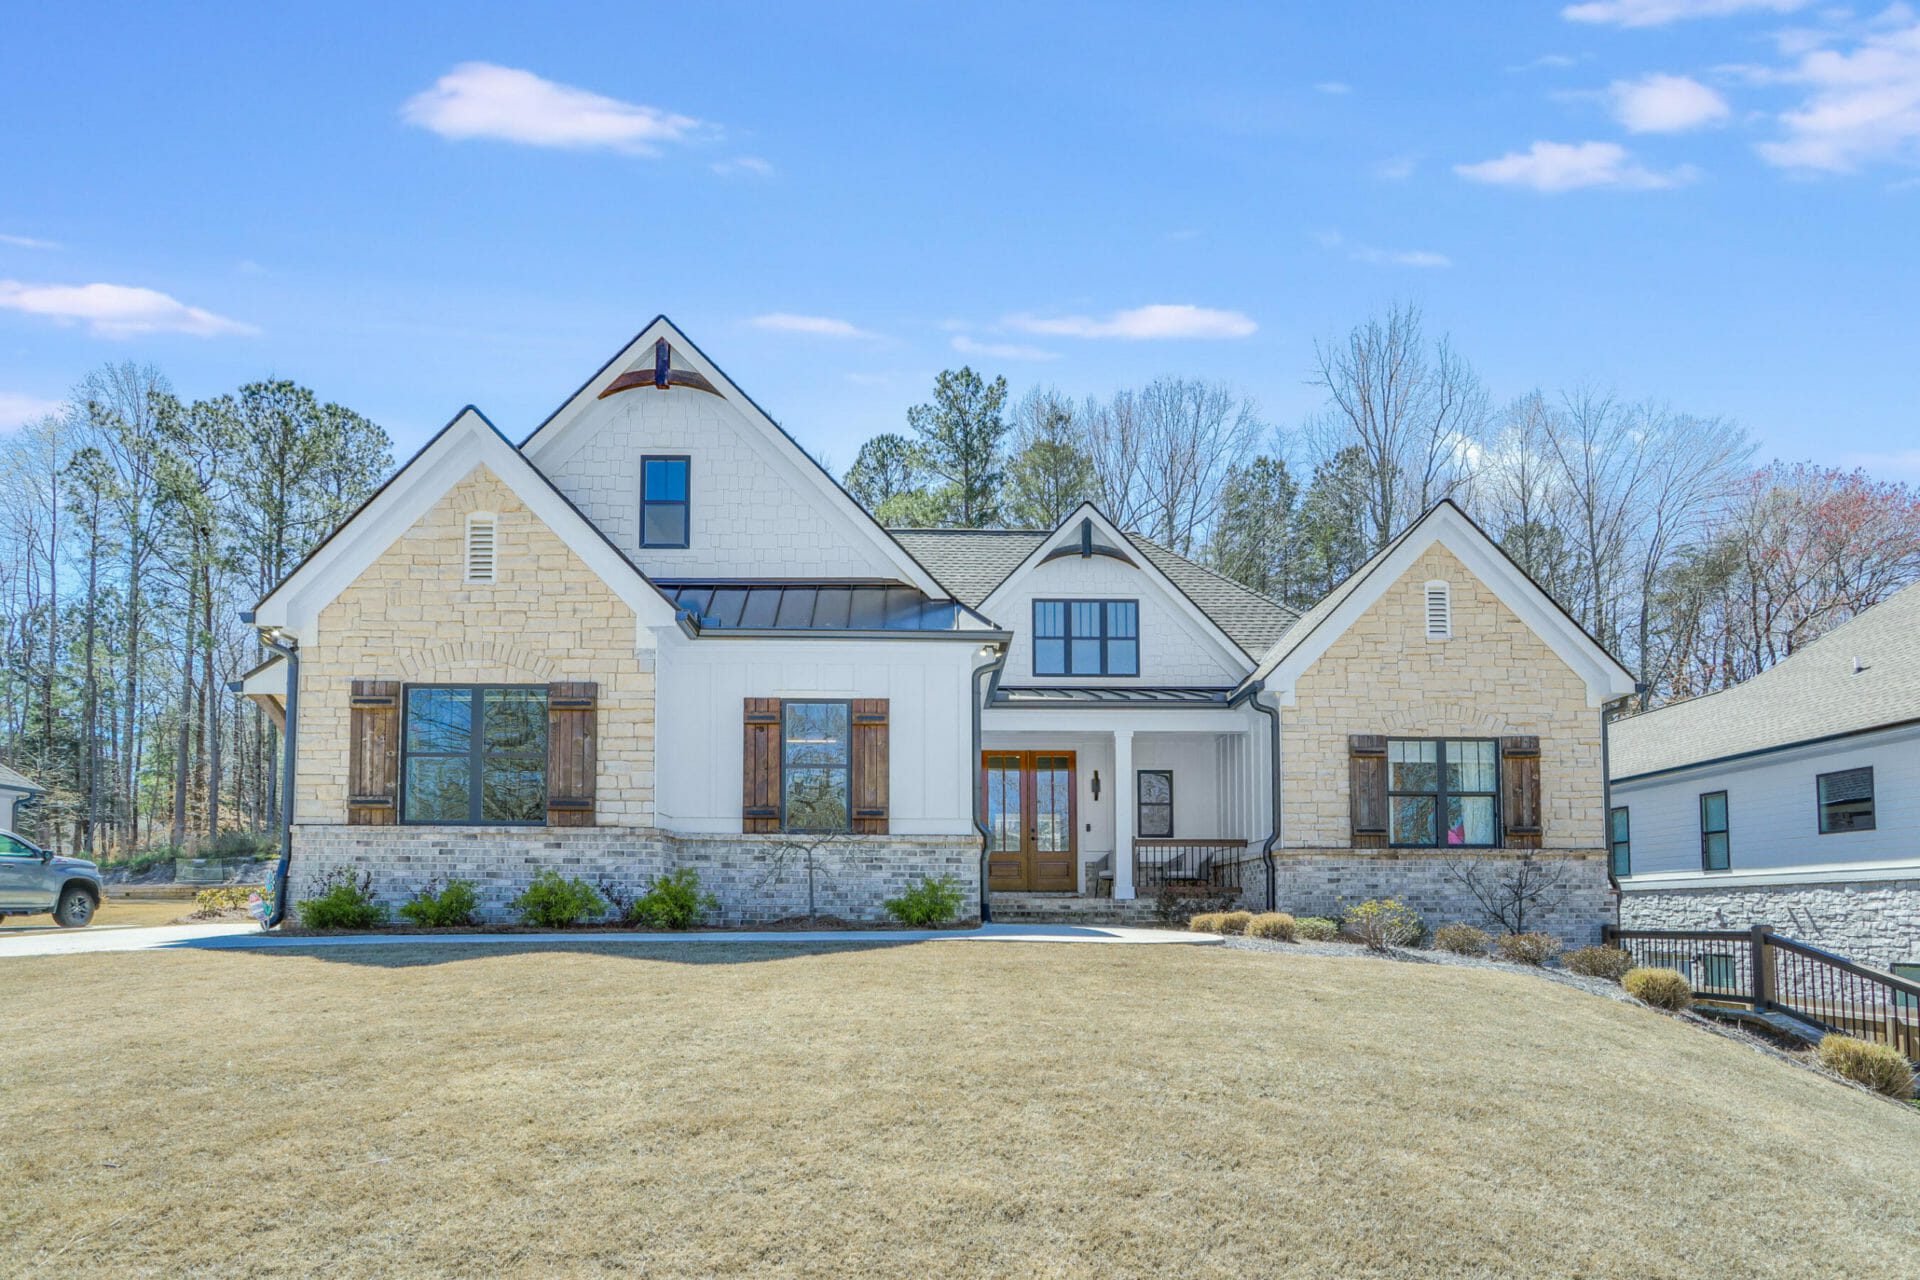 White ranch style home with stone on Lake Lanier